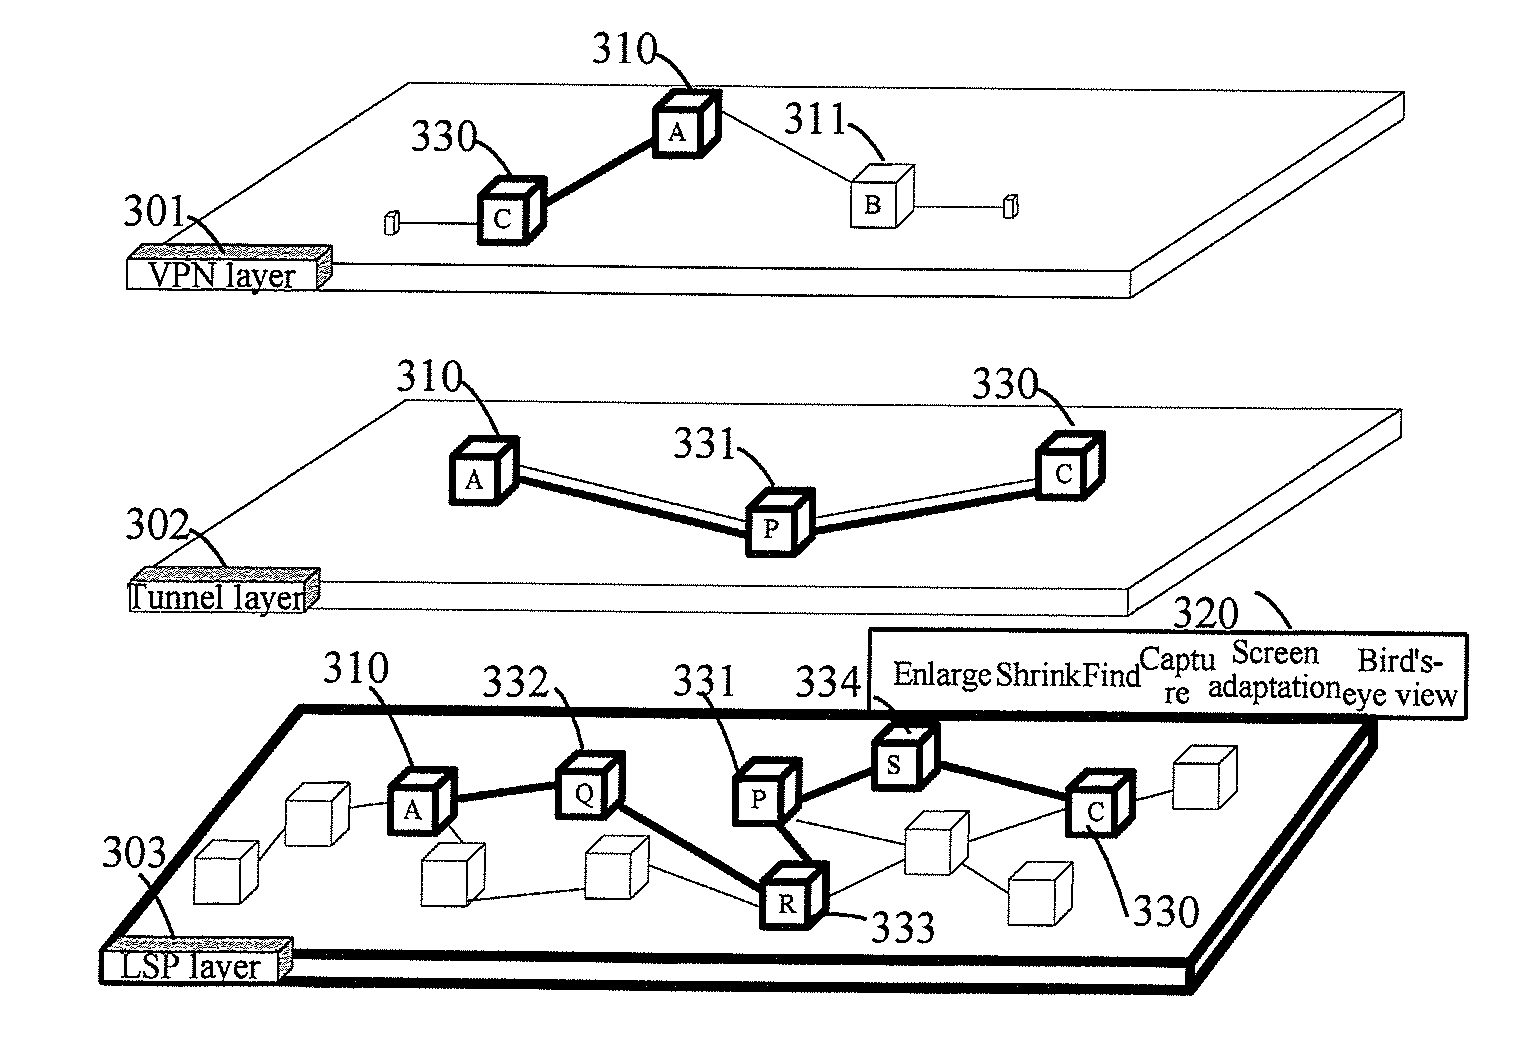 Method and apparatus for presenting network path